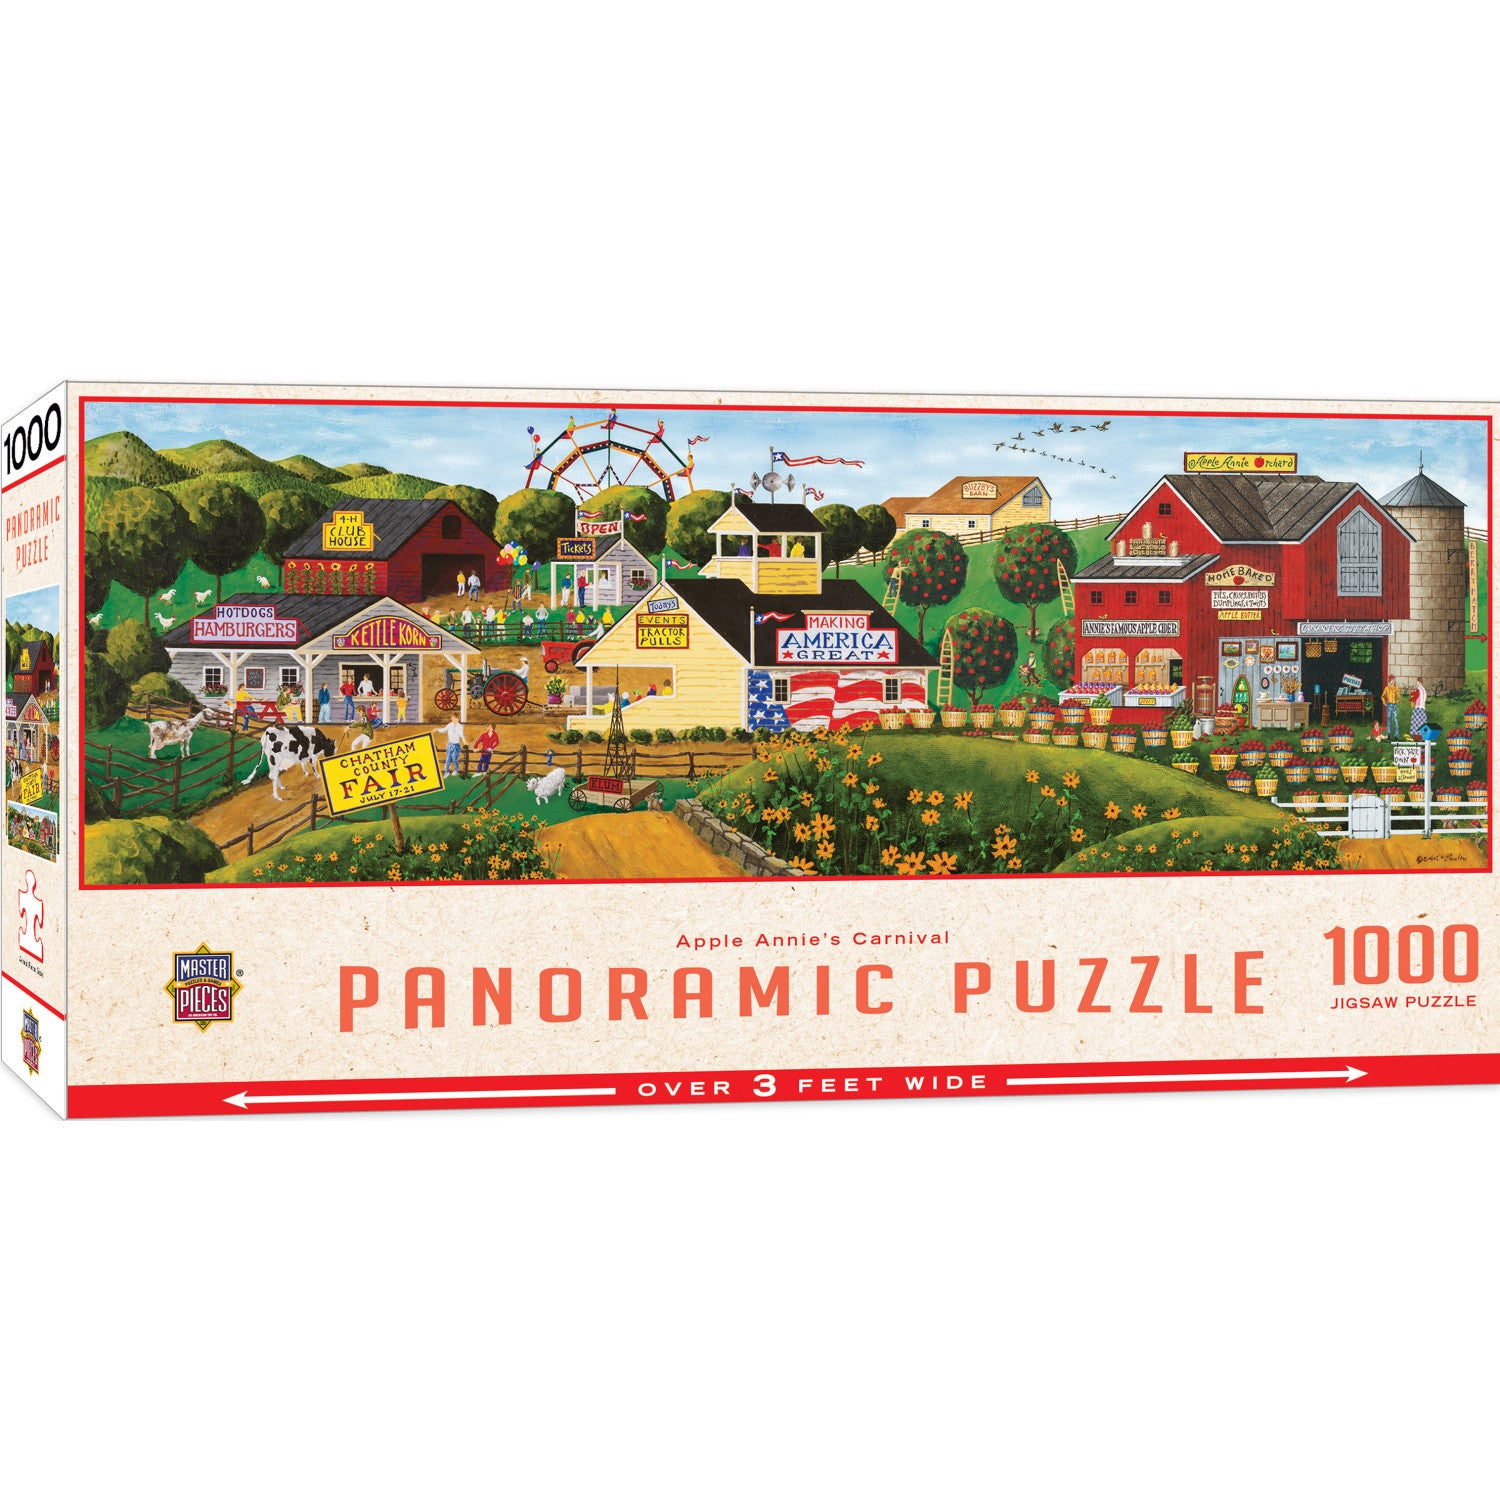 Apple Annie's Carnival 1000 Piece Panormic Jigsaw Puzzle